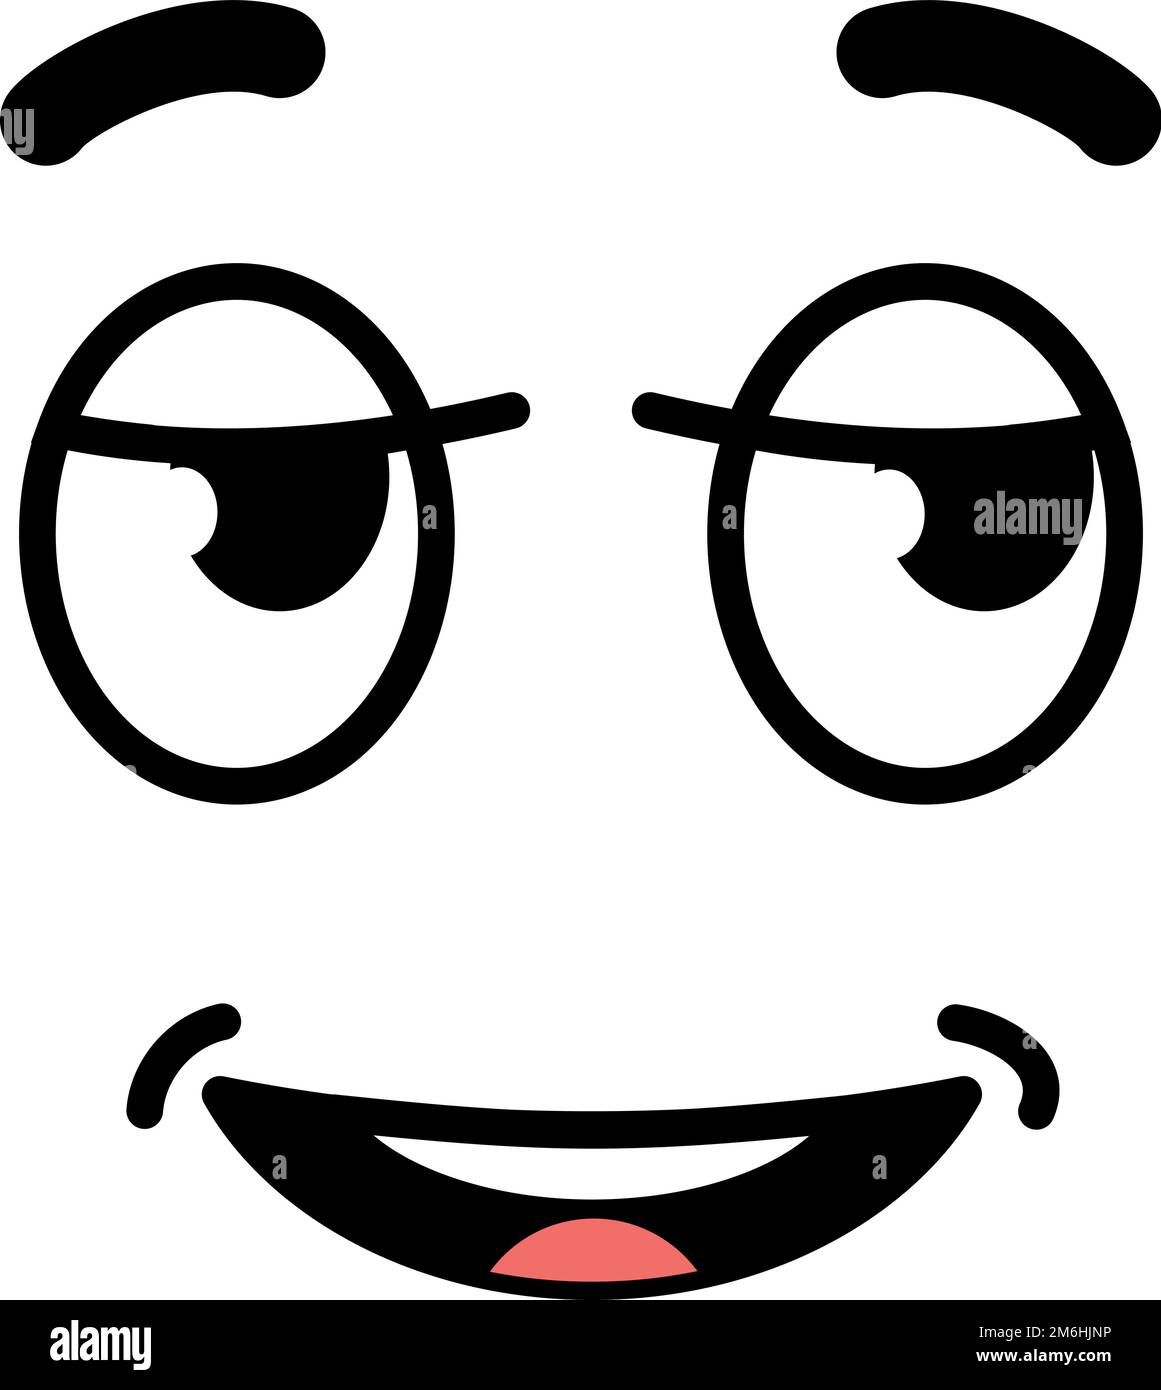 Relieved comic face. Smiling happy expression doodle Stock Vector